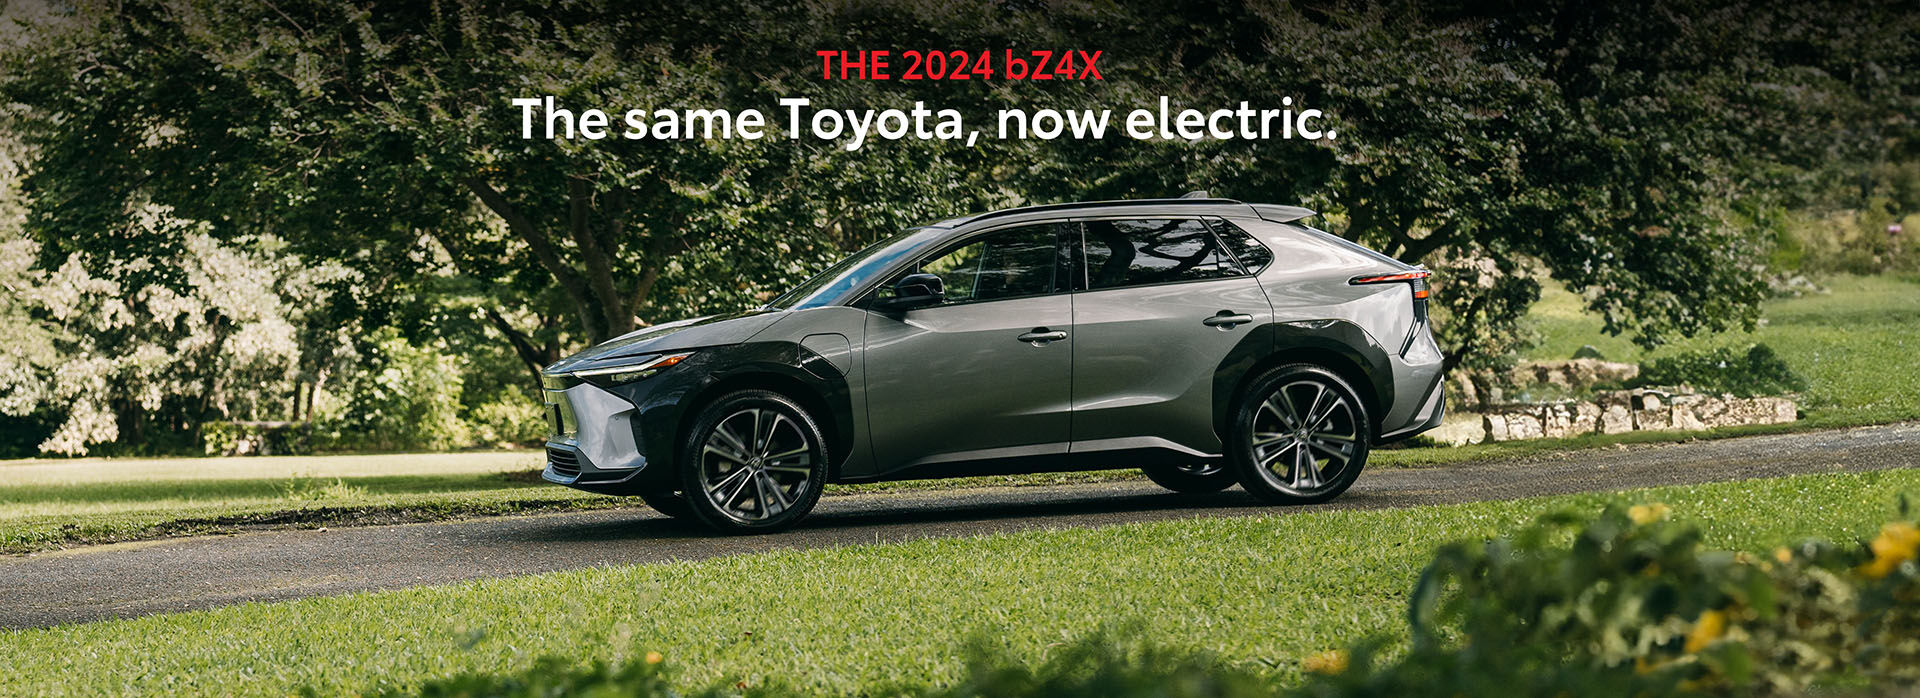 The 2024 bZ4X. The same Toyota, now electric. 